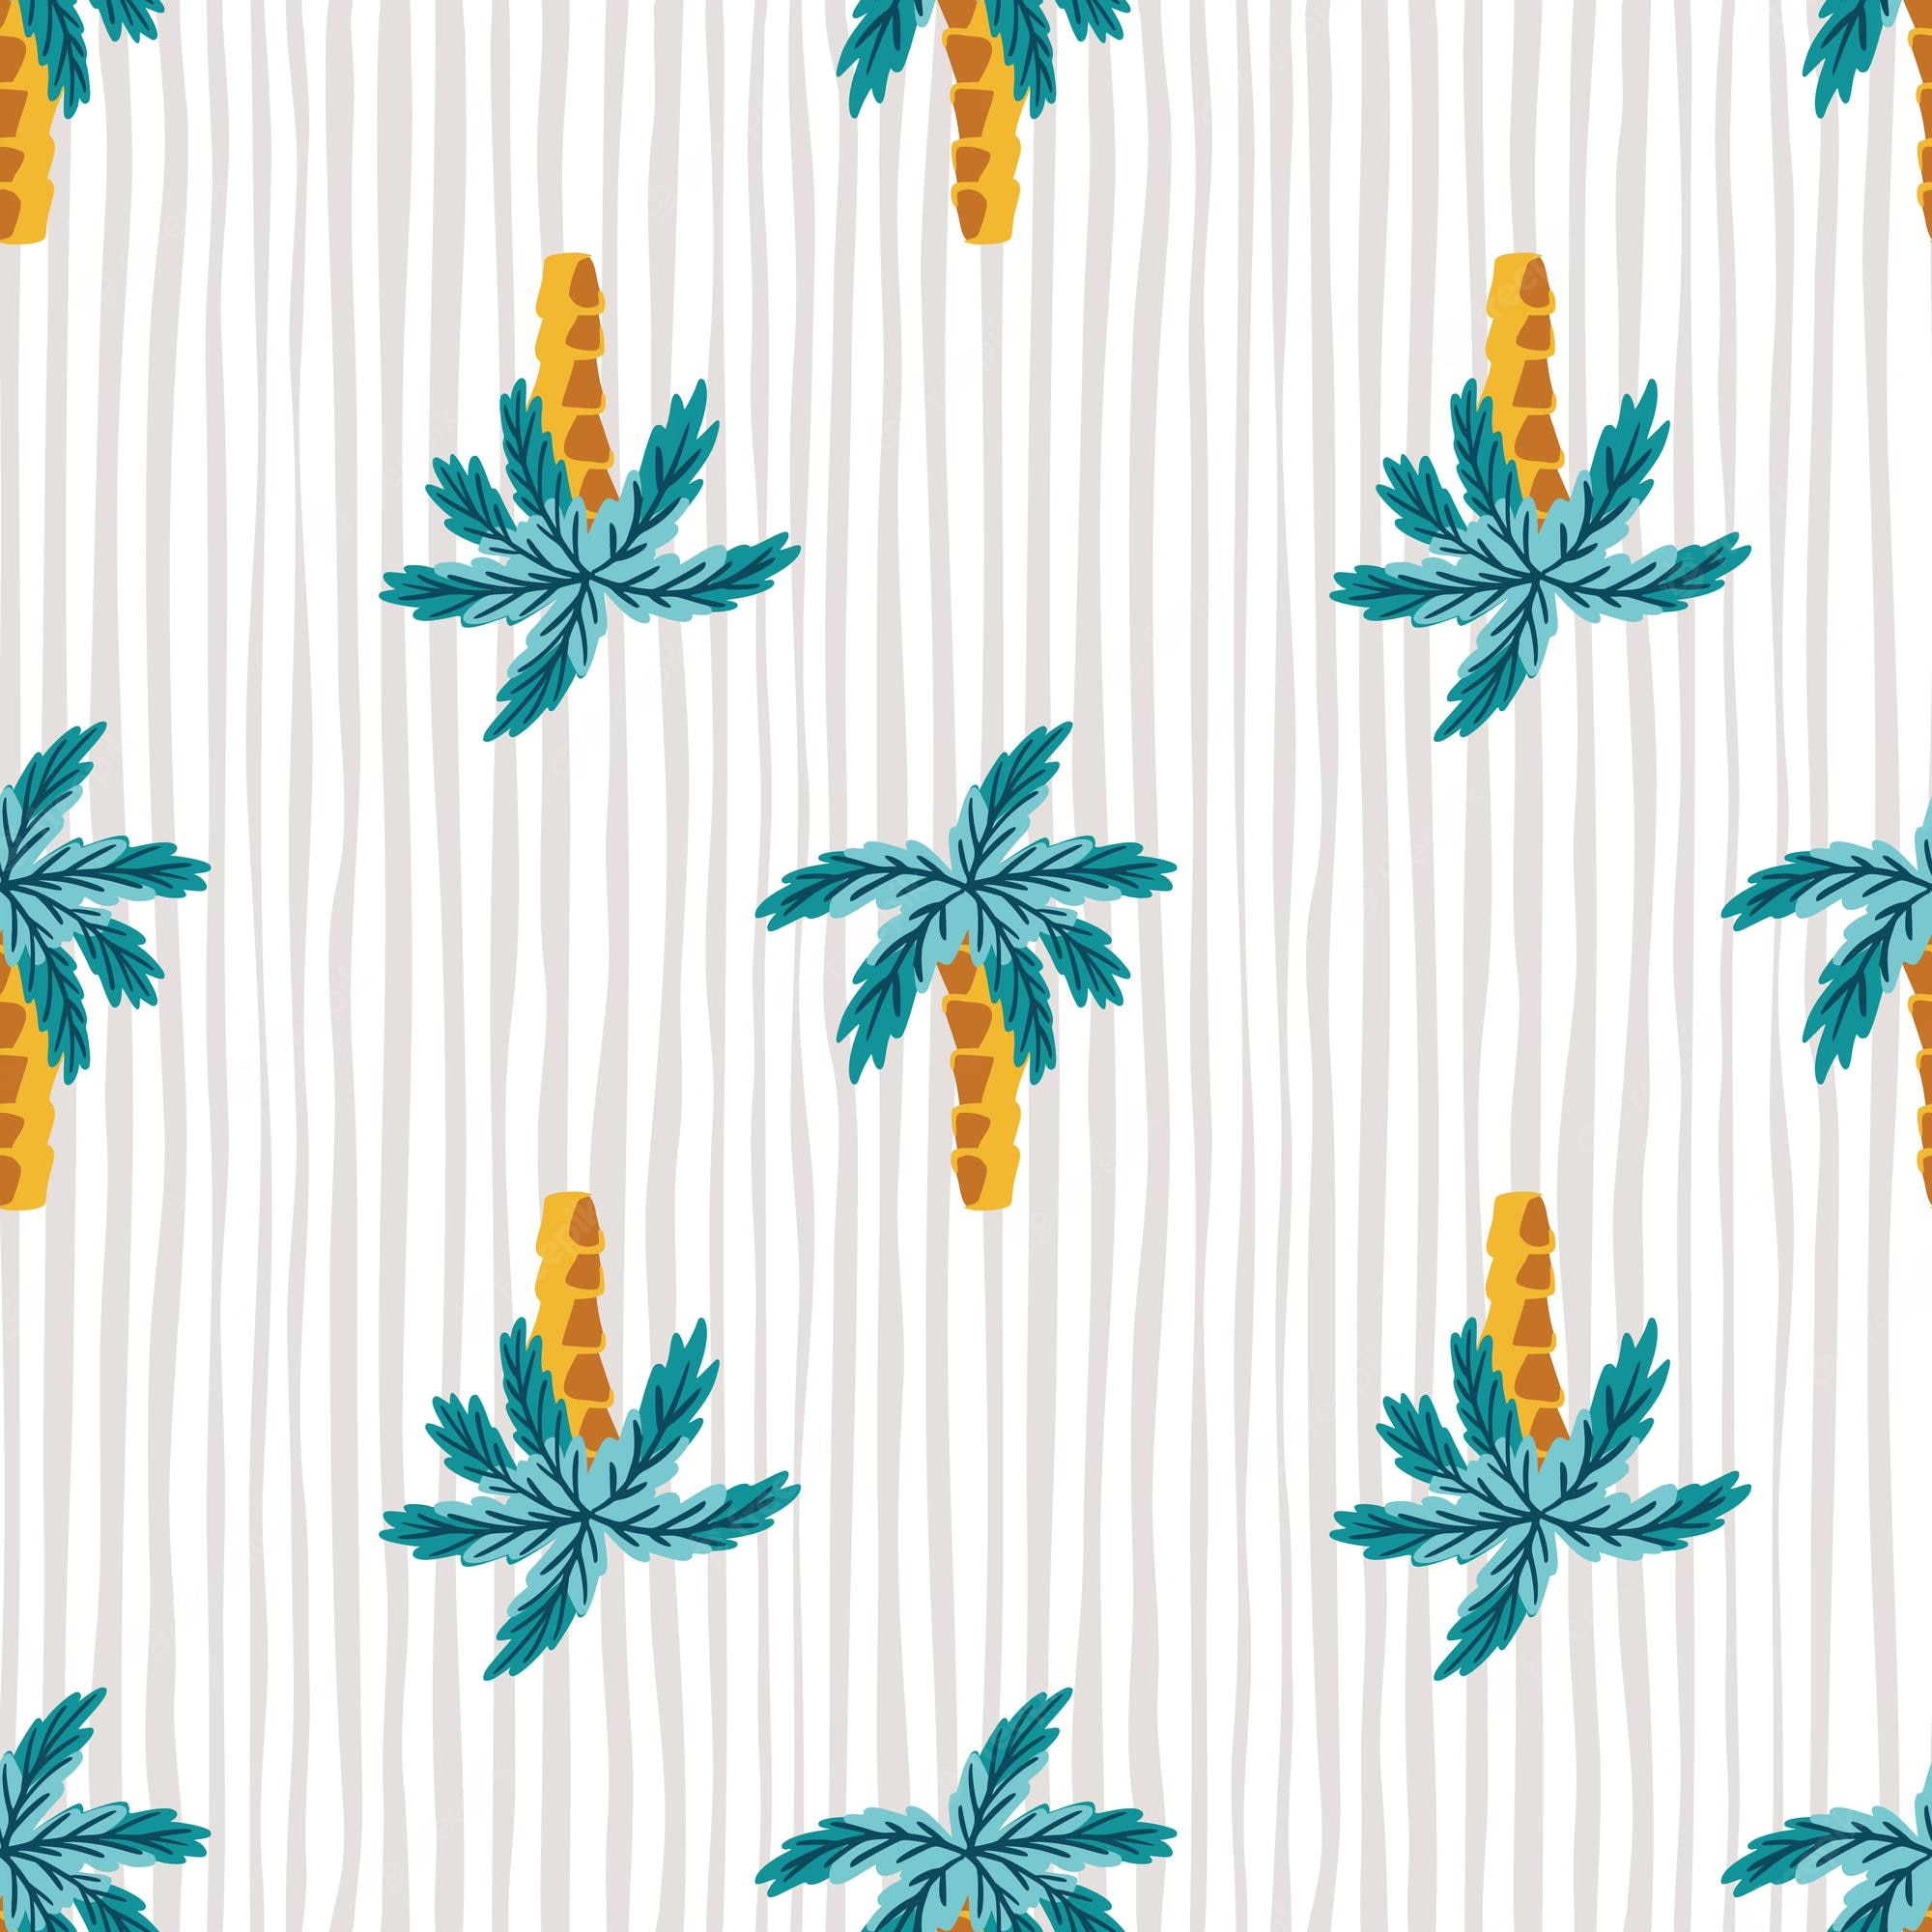 Premium Vector. Hawaiian style seamless pattern with bright blue abstract palms tree silhouettes. striped grey background. designed for fabric design, textile print, wrapping, cover. vector illustration